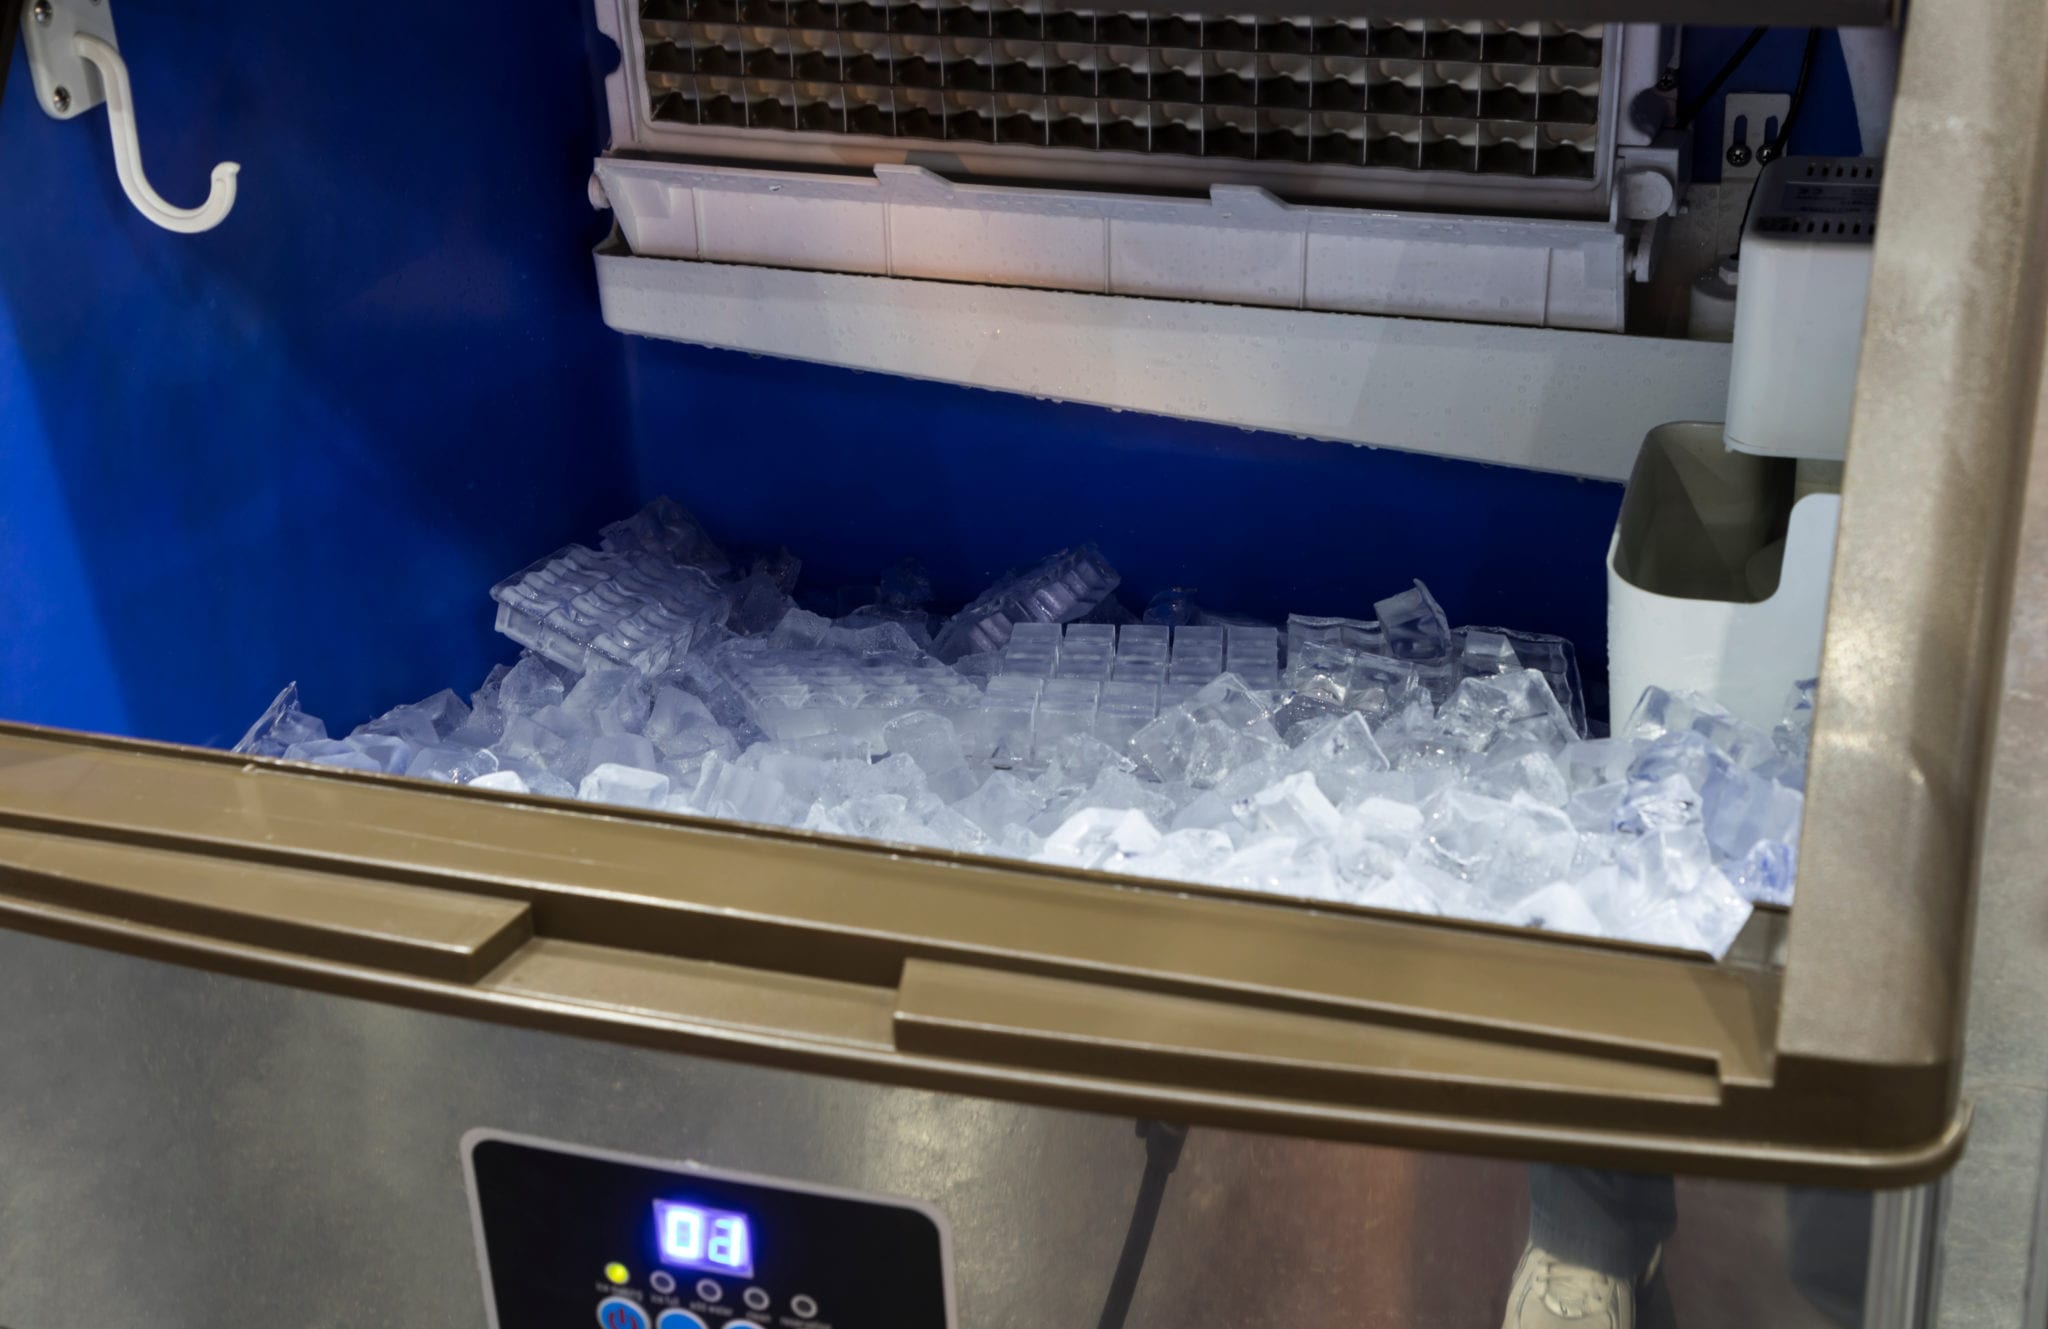 Ice Maker Not Working? Troubleshoot The Issue With These 8 Tips